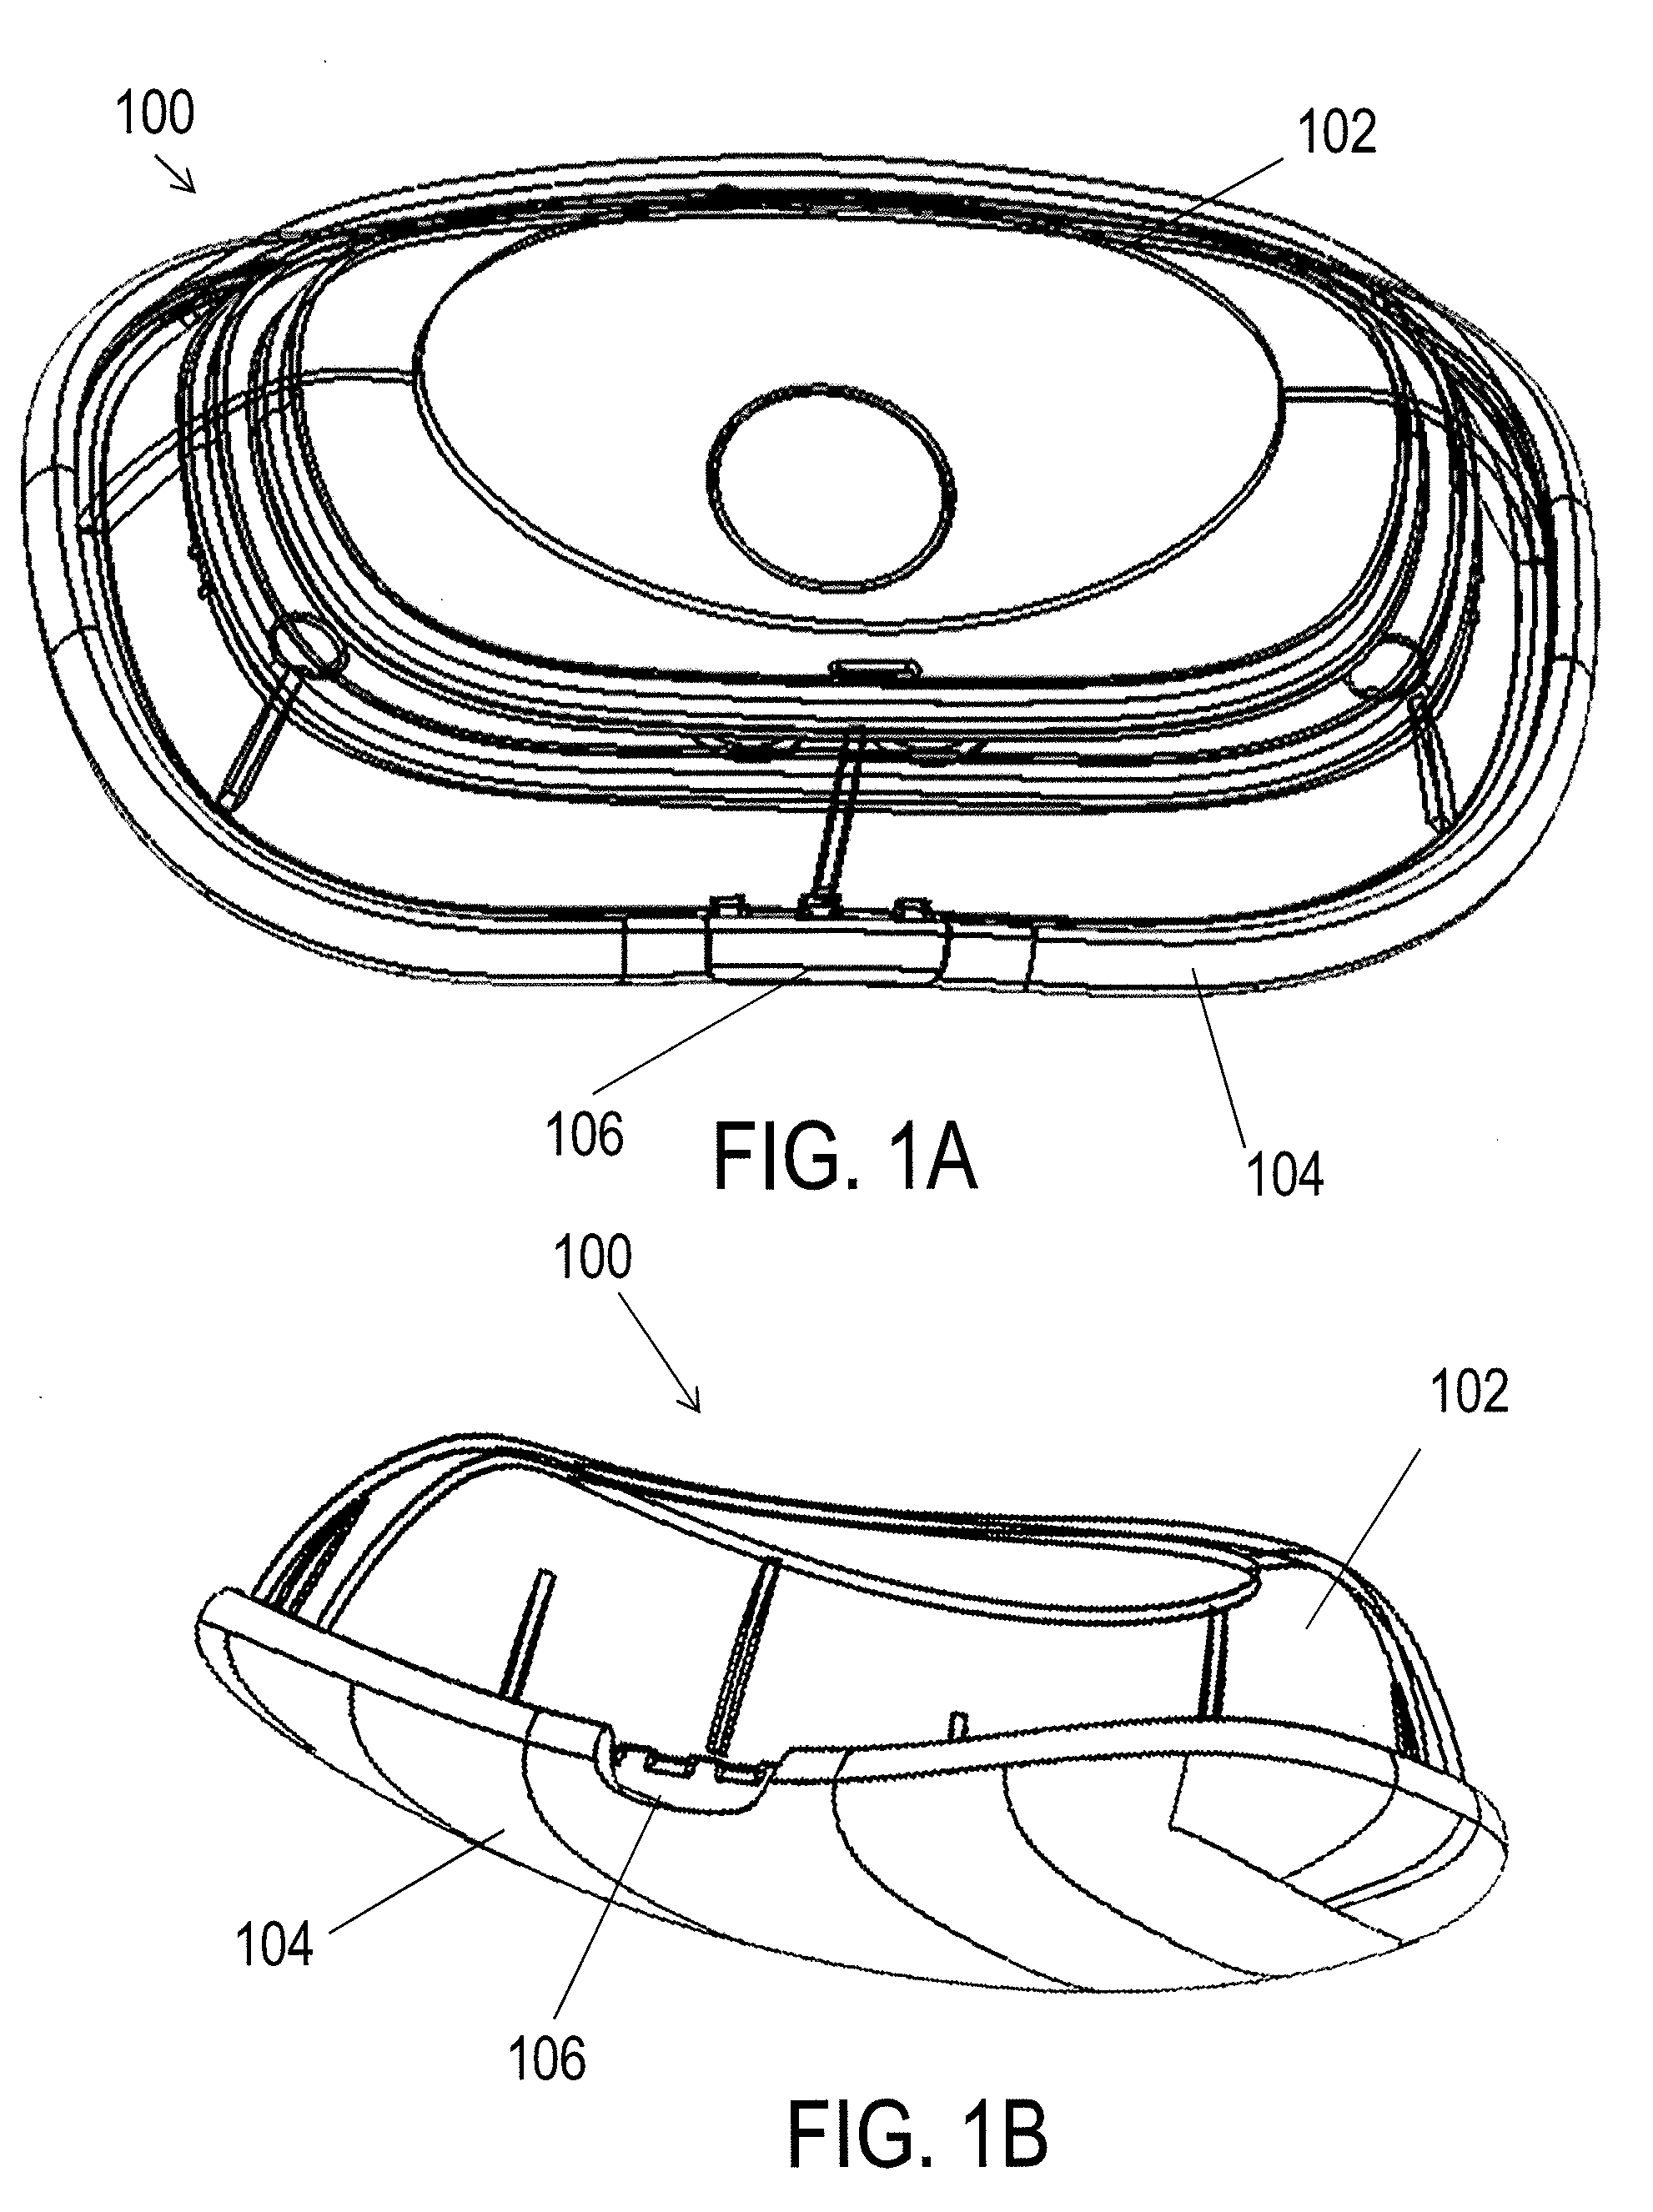 Wearable transdermal electrical stimulation devices and methods of using them